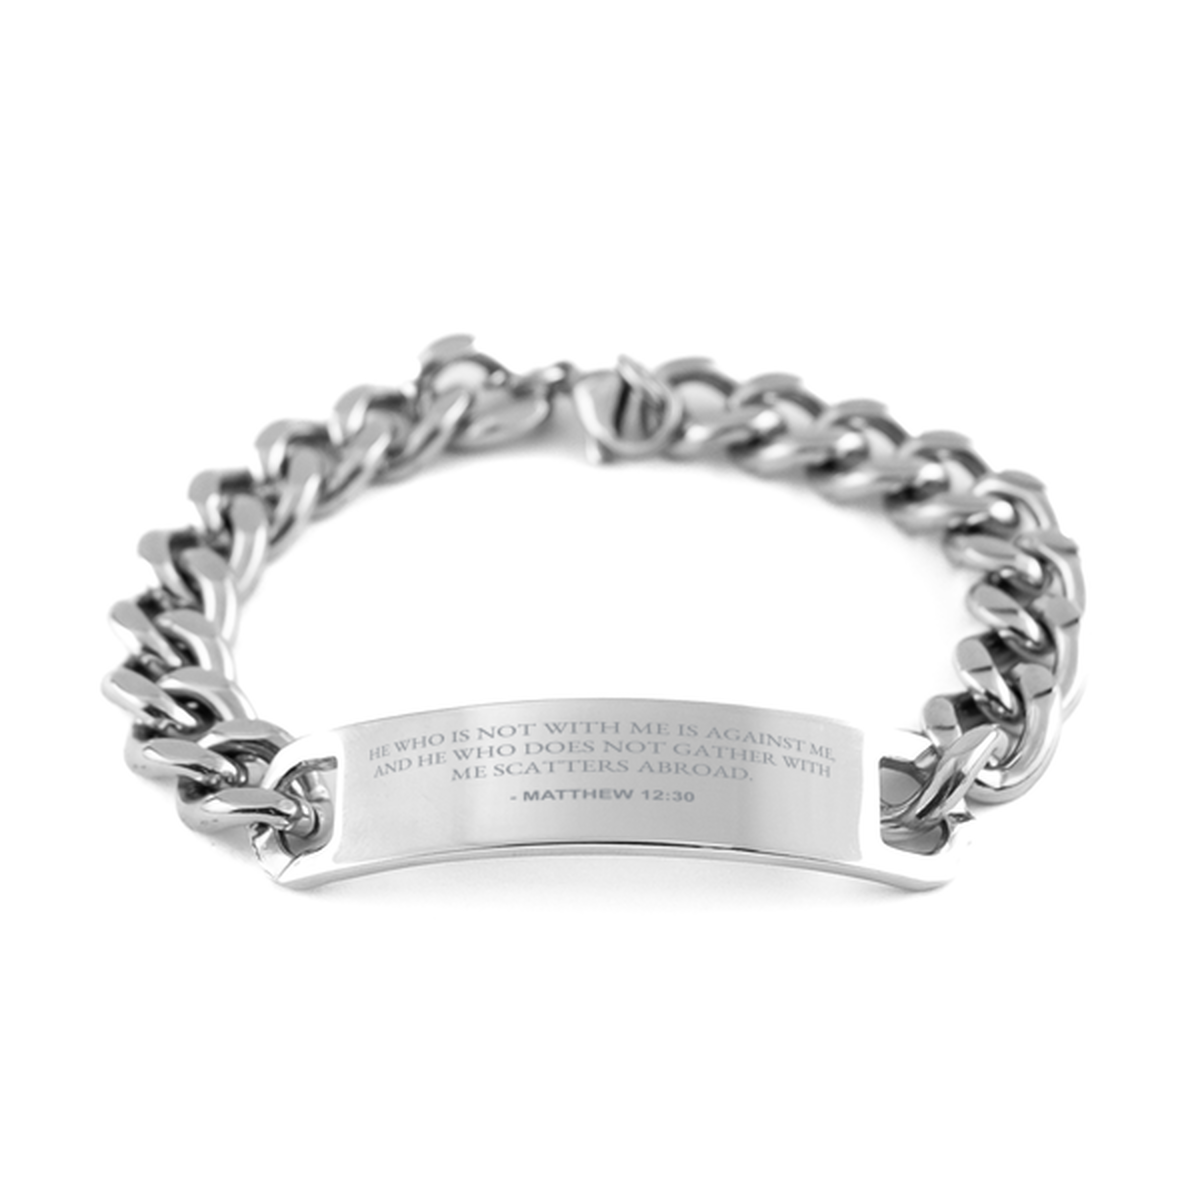 Bible Verse Chain Stainless Steel Bracelet, Matthew 12:30 He Who Is Not With Me Is Against Me, And He Who, Inspirational Christian Gifts For Men Women